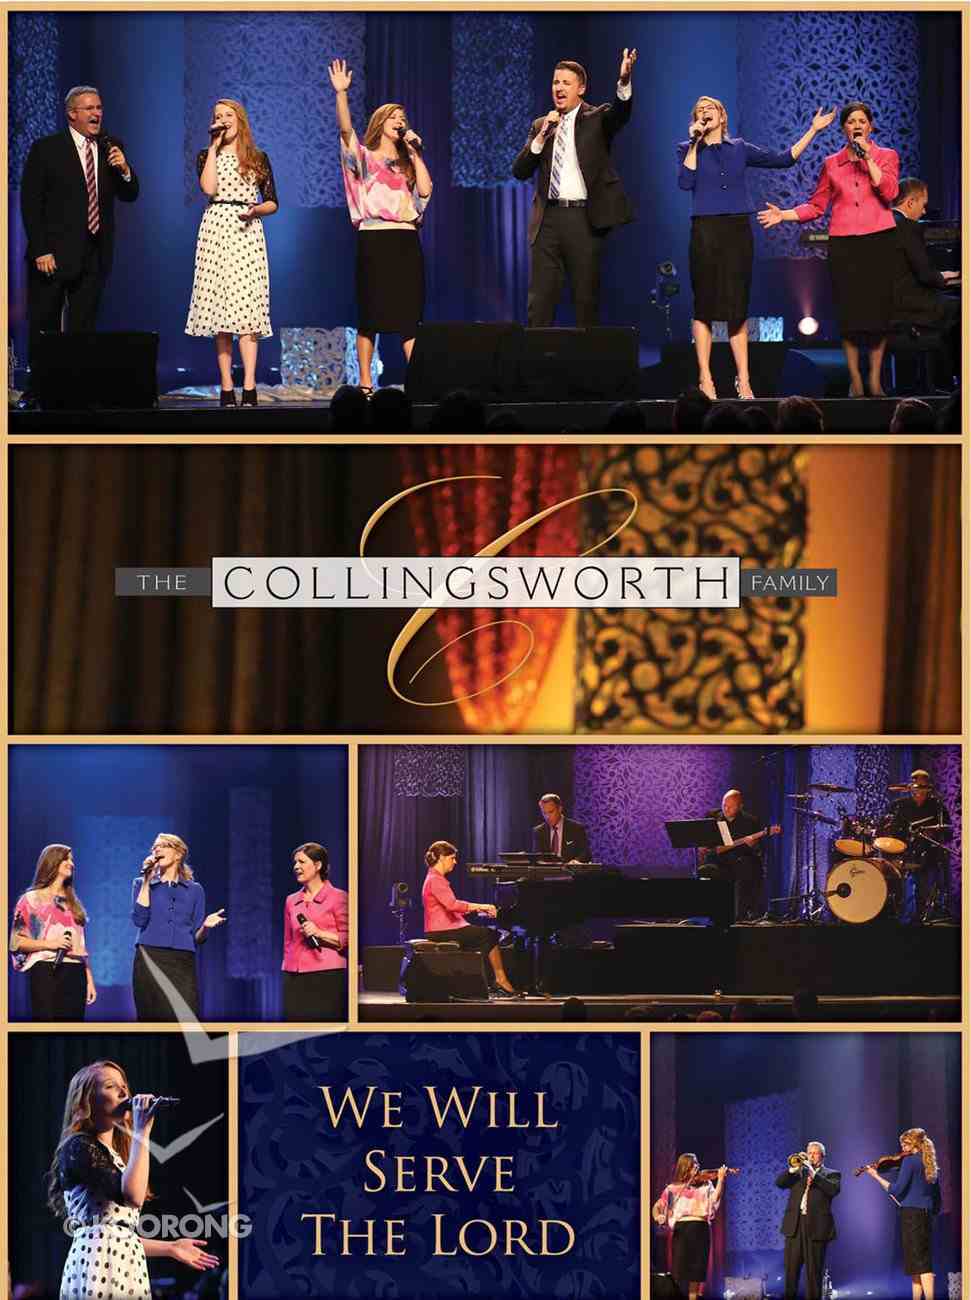 We Will Serve the Lord DVD